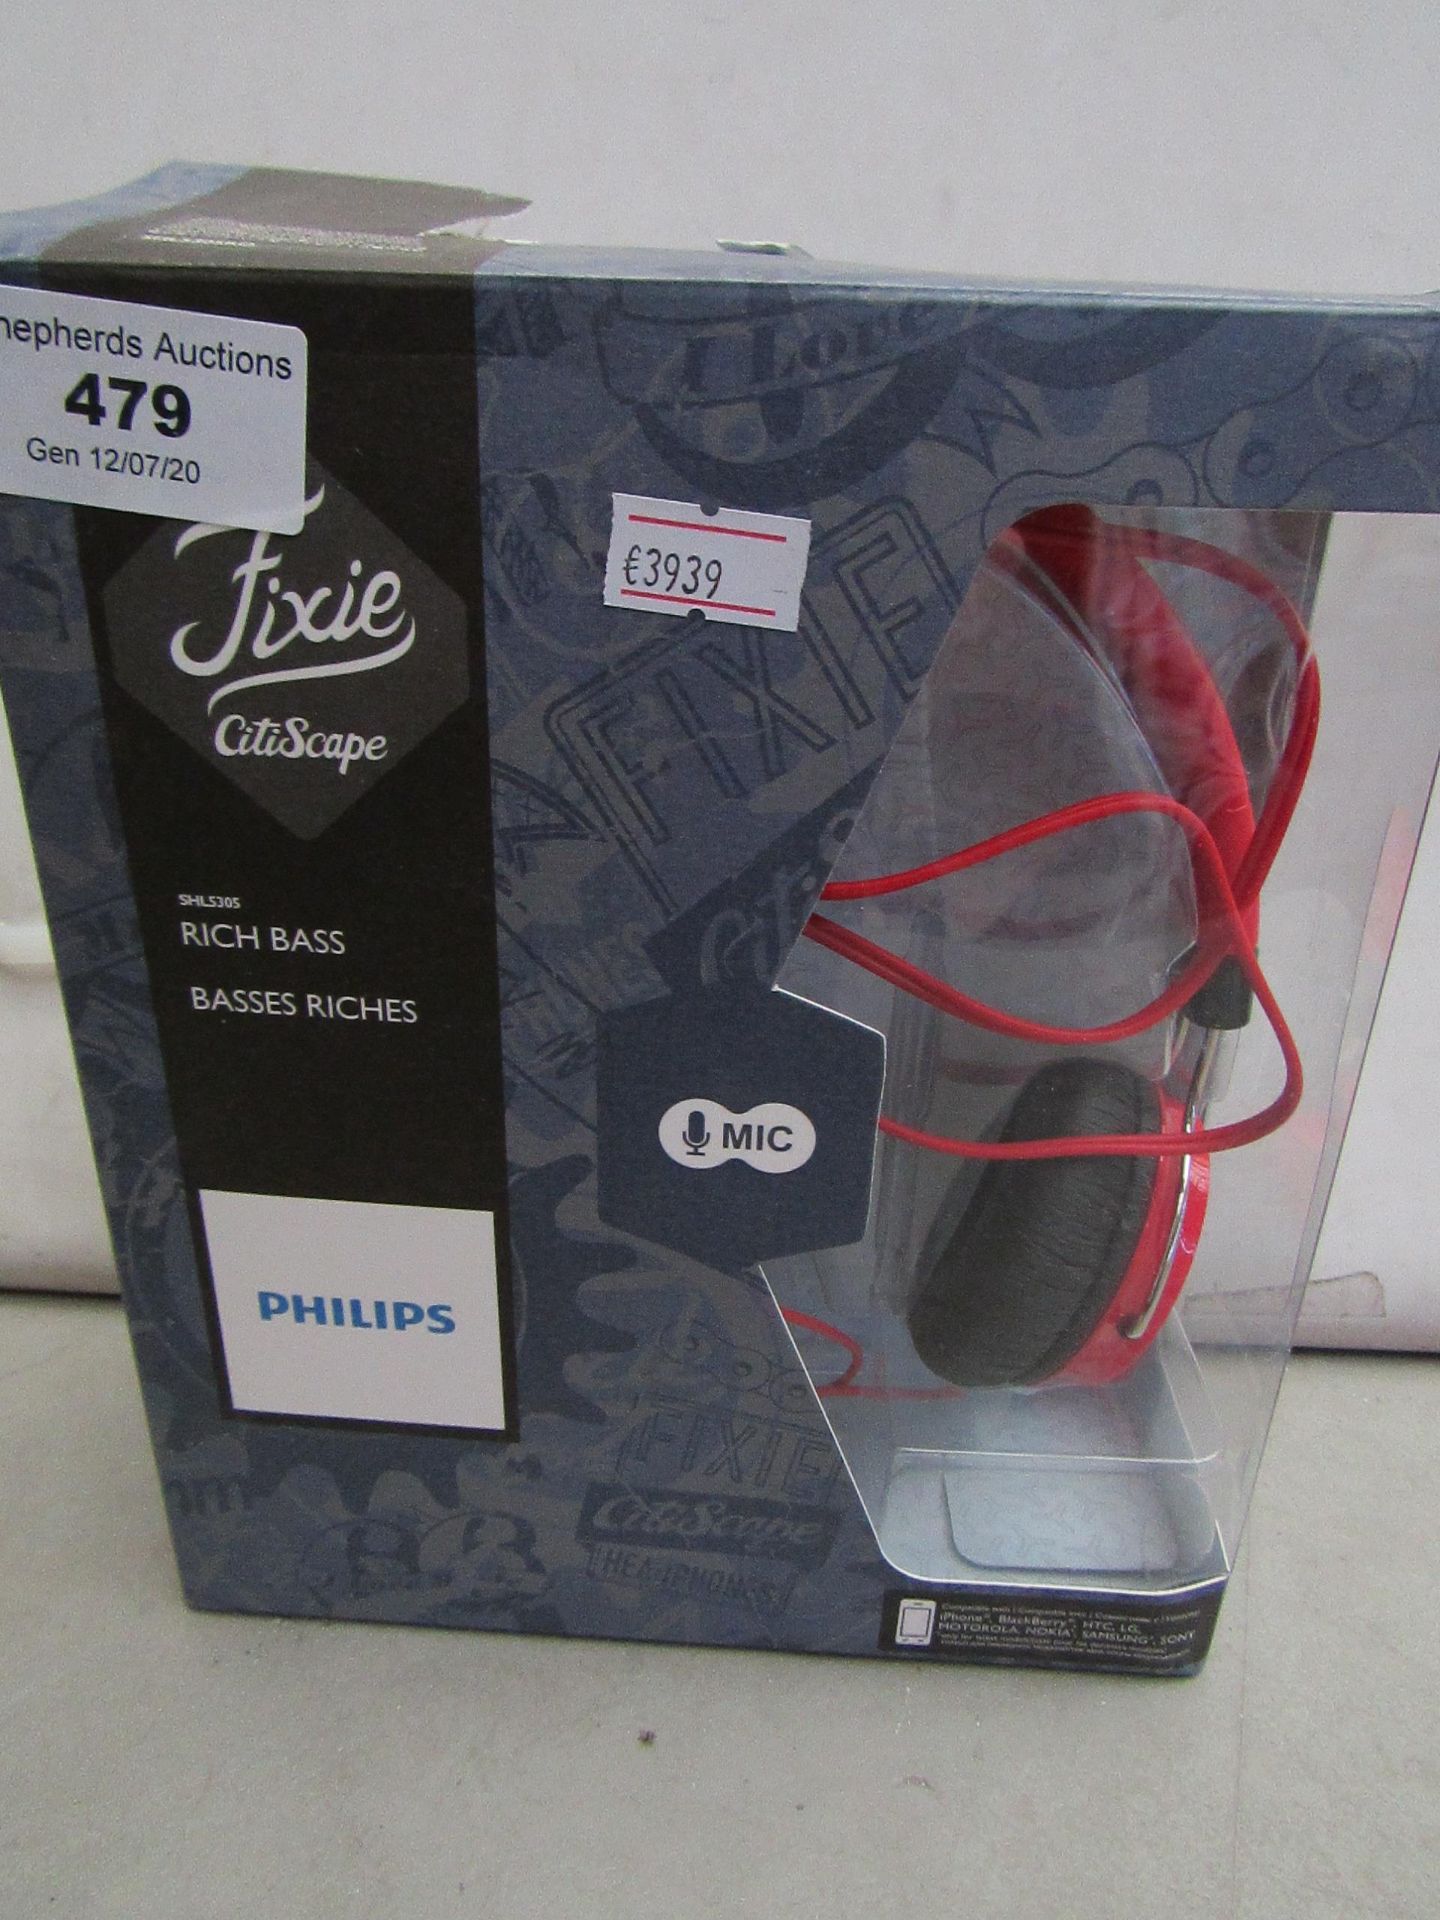 Philips Cityscape bass headphones, new and boxed. - Image 2 of 2